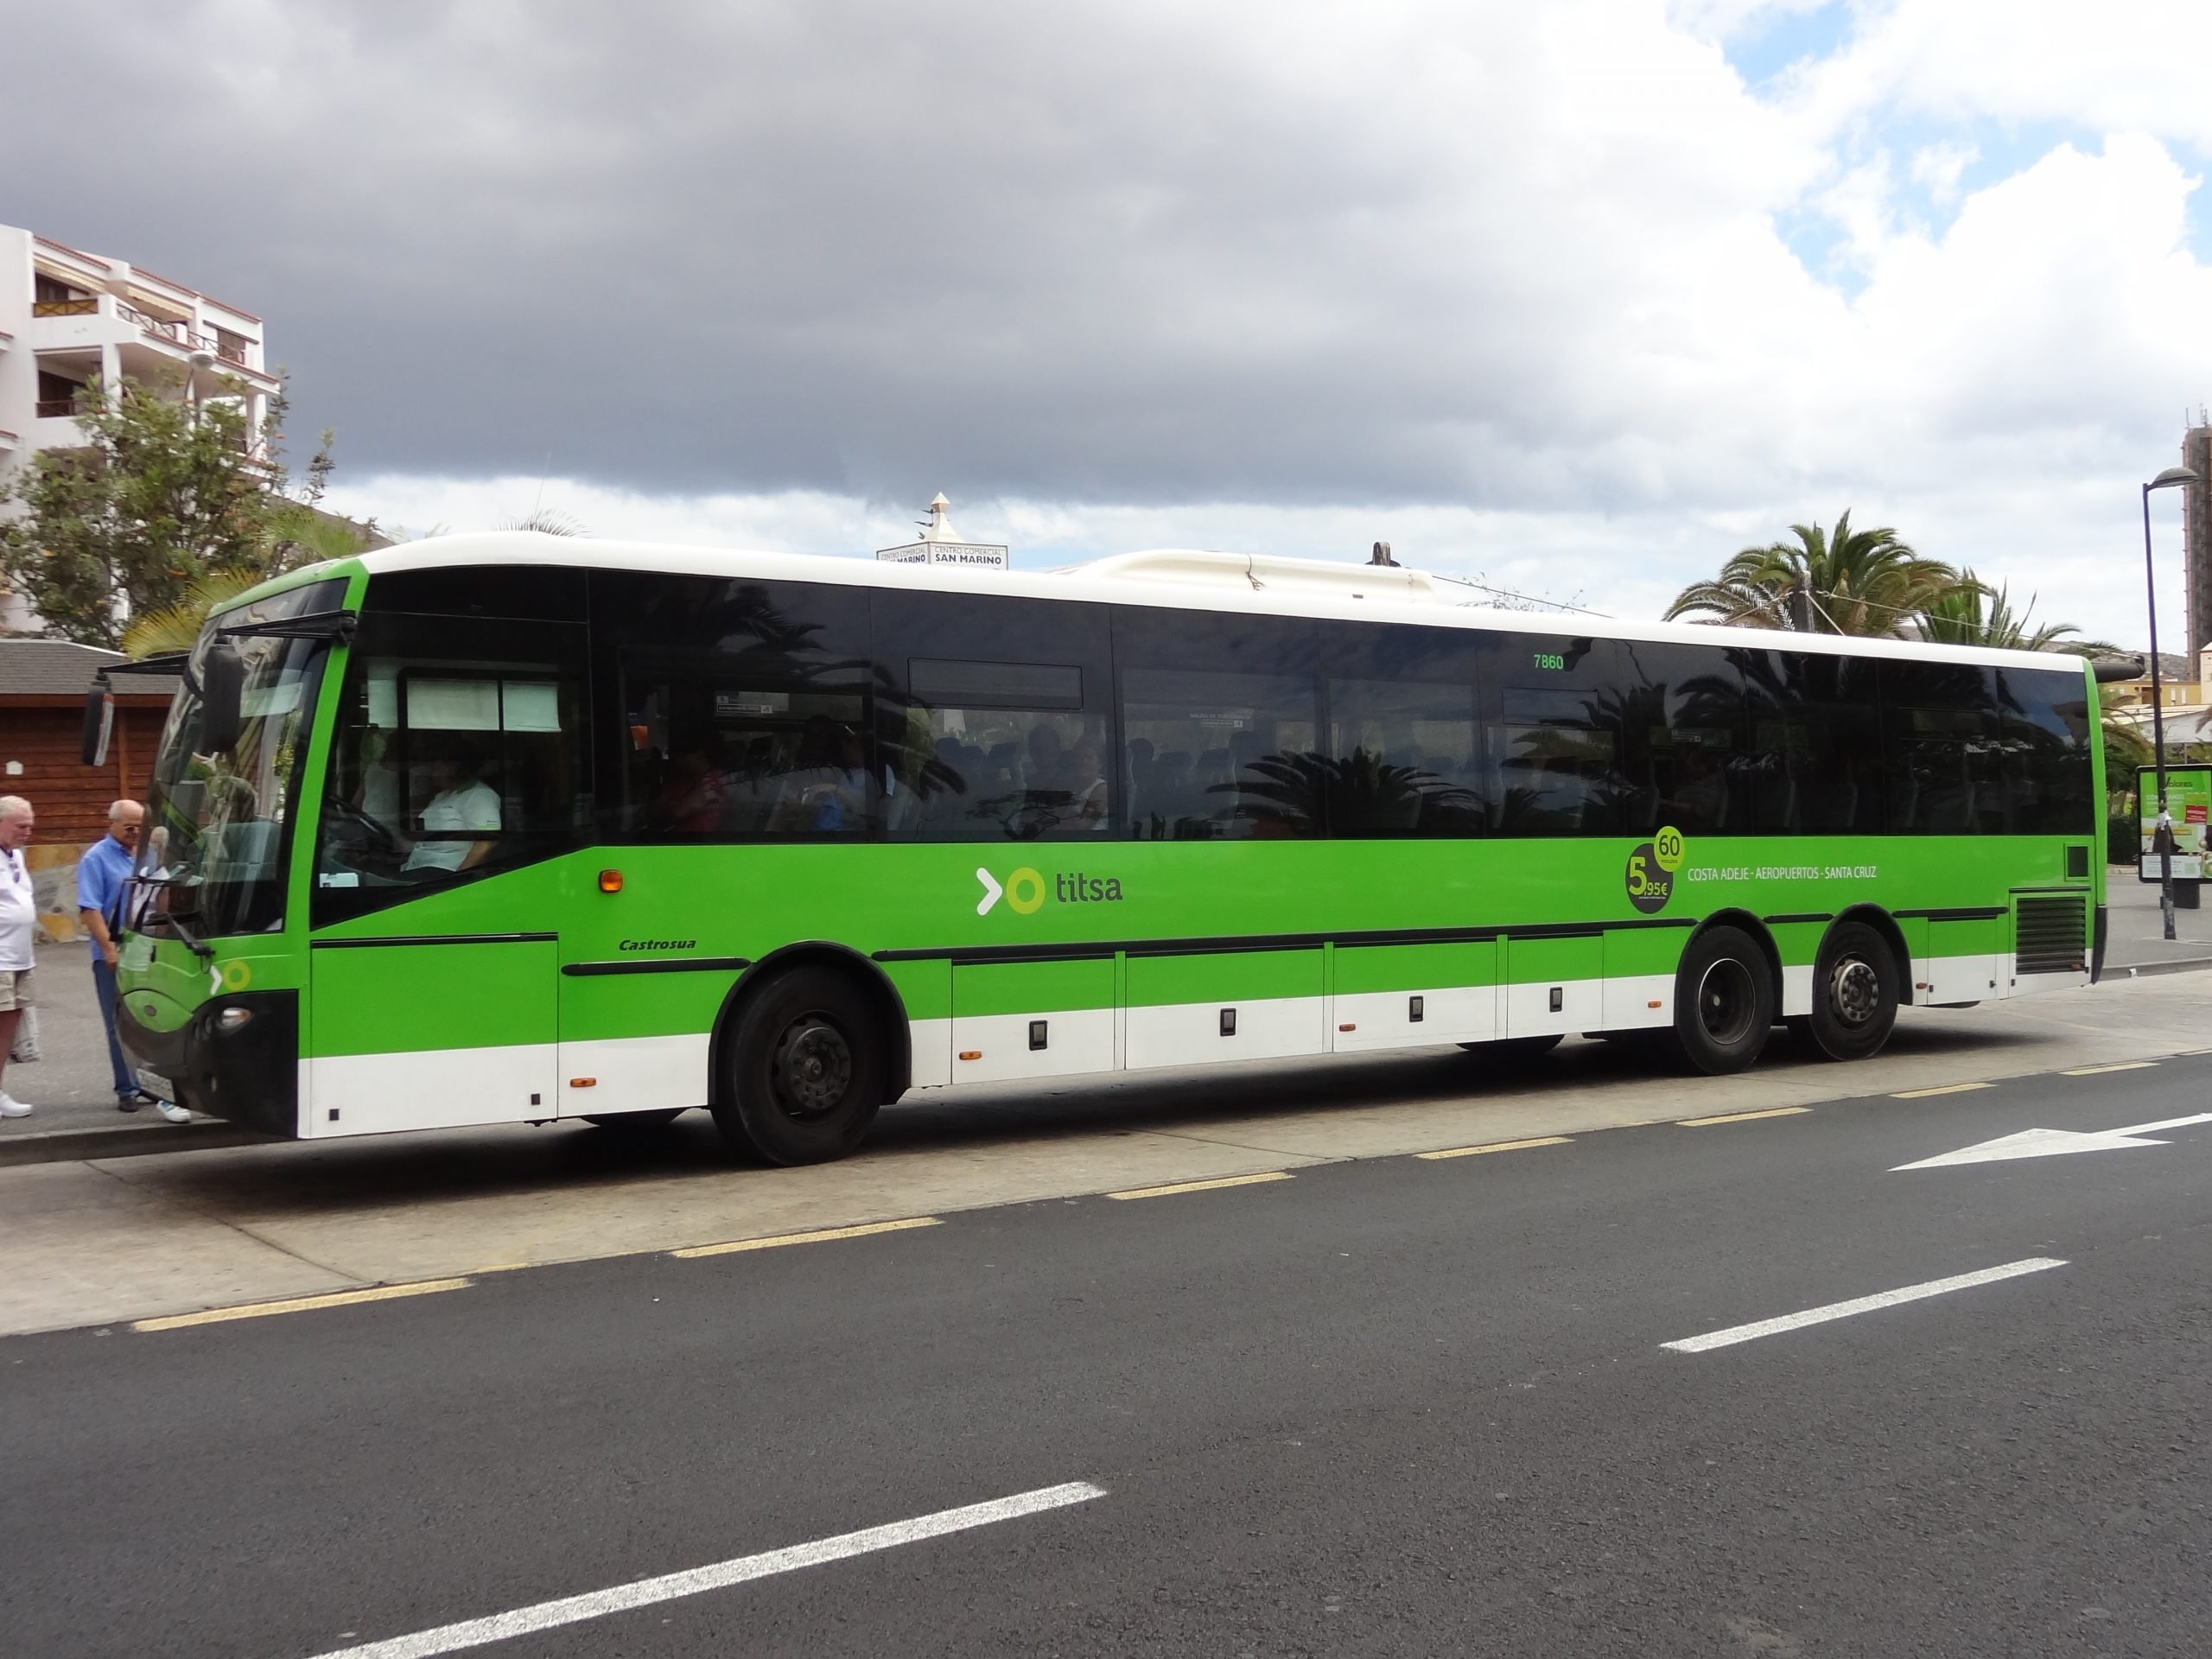 How To Get From South Tenerife Airport To Los Gigantes - All Possible Ways, cheapest way from Tenerife airport to Los Gigantes, Tenerife airport to Los Gigantes, Tenerife airport to Los Gigantes, Tenerife airport to Los Gigantes, Tenerife Bus Airport, bus from Tenerife airport to Los Gigantes, taxi Tenerife airport to Los Gigantes, Uber Tenerife airport to Los Gigantes, Tenerife airport to Los Gigantes by bus, Tenerife airport to Los Gigantes, Tenerife to Los Gigantes, Titsa bus fare Tenerife airport to Los Gigantes, Tenerife airport to Los Gigantes and Puerto de Santiago, Day Travel Card Tenerife, Titsa Bus Day Travel Card